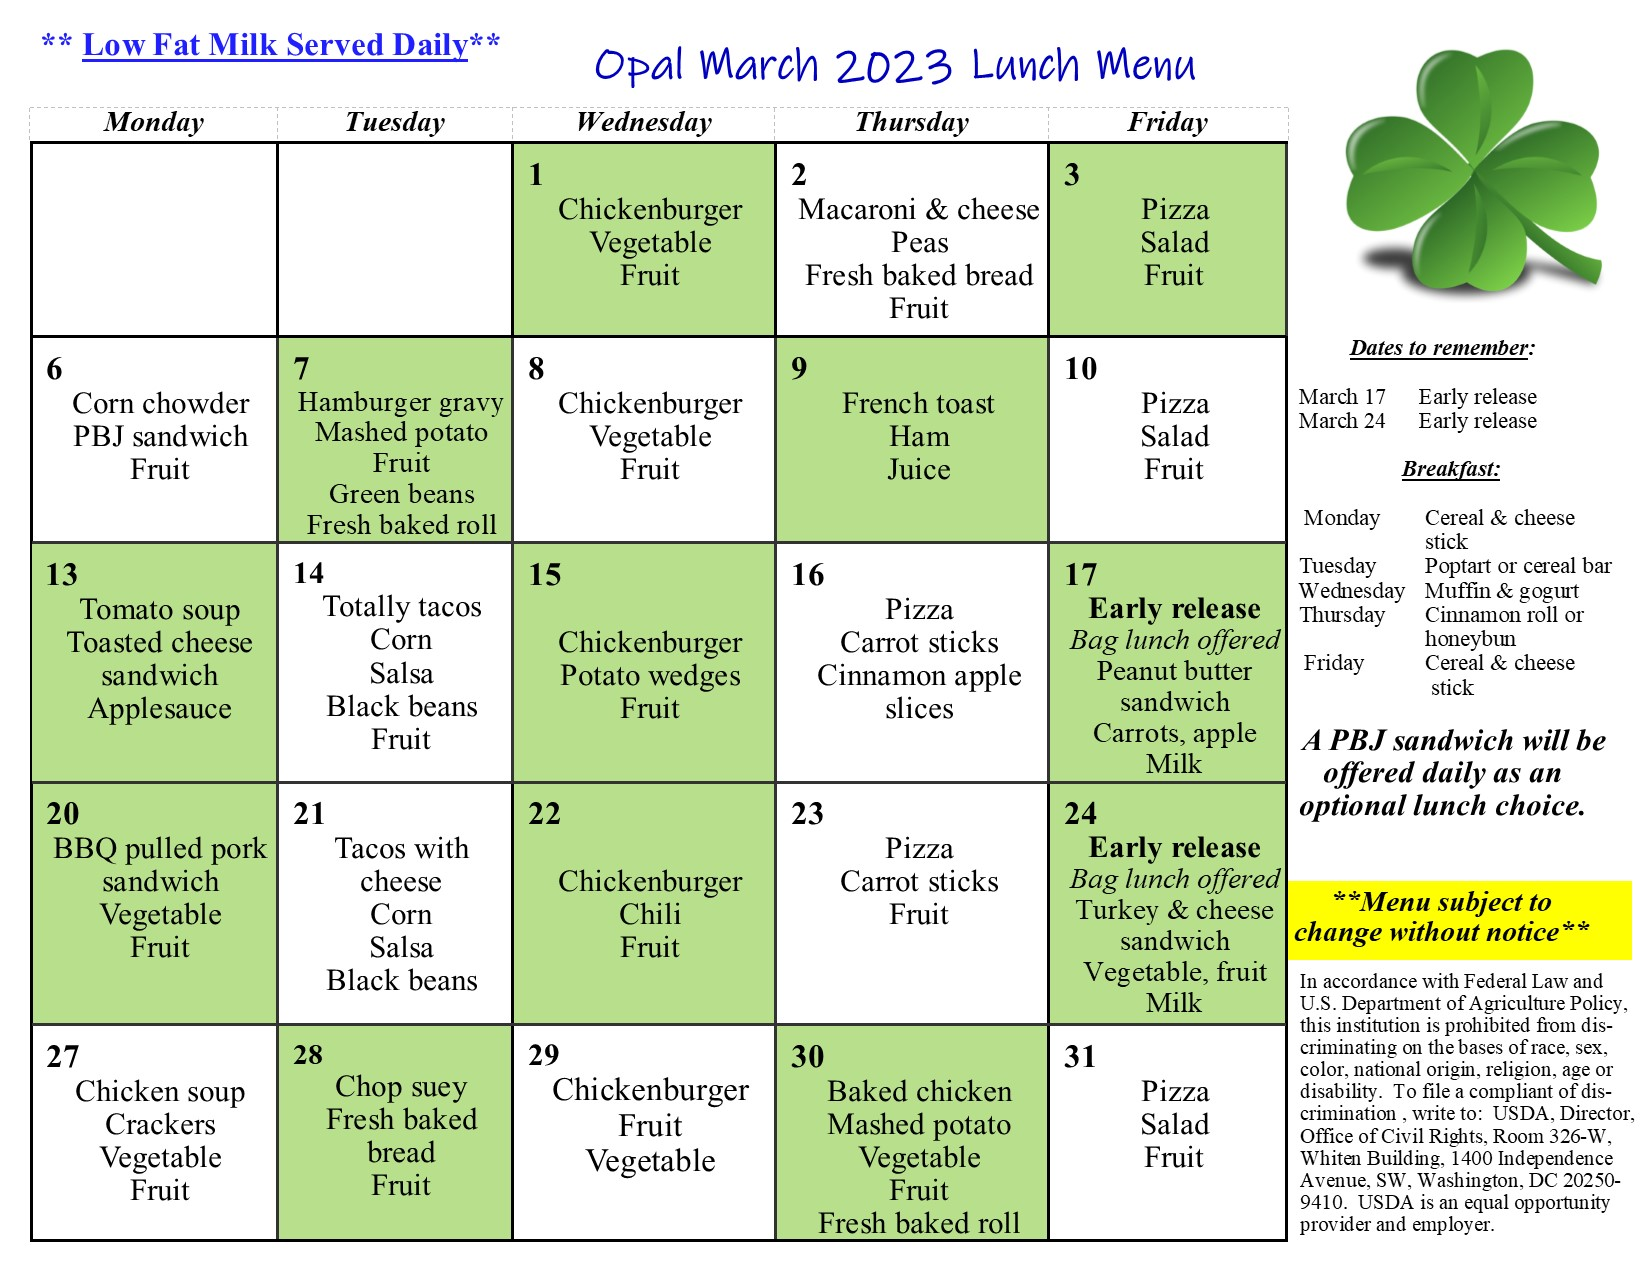 Picture displays the lunch menu for March at Opal Myrick School